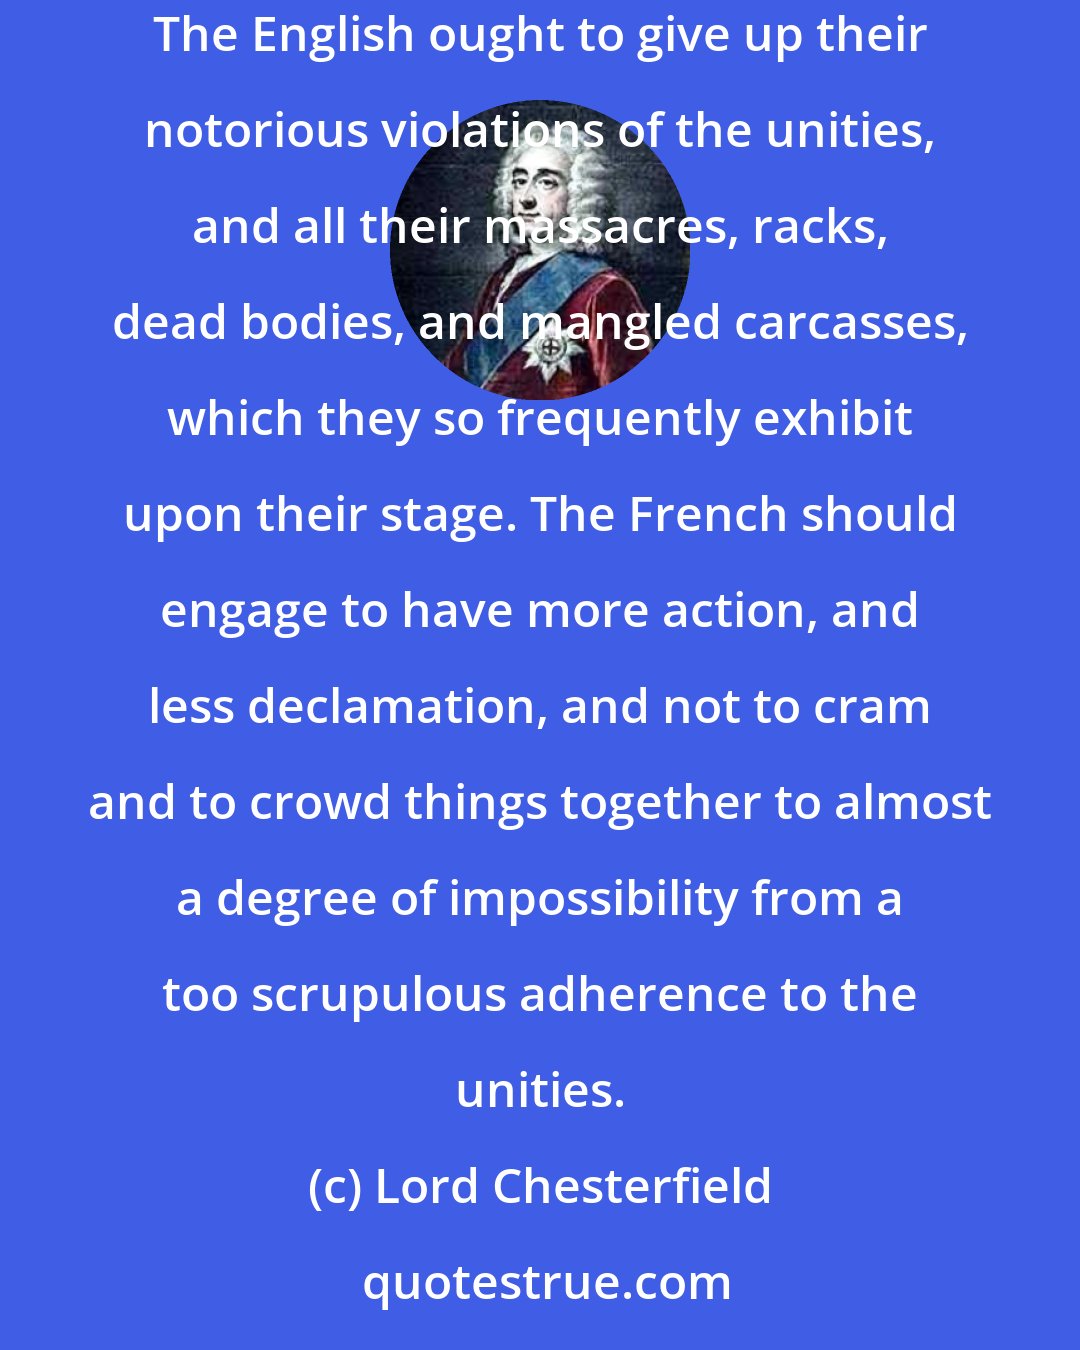 Lord Chesterfield: I could wish there were a treaty made between the French and the English theatres, in which both parties should make considerableconcessions. The English ought to give up their notorious violations of the unities, and all their massacres, racks, dead bodies, and mangled carcasses, which they so frequently exhibit upon their stage. The French should engage to have more action, and less declamation, and not to cram and to crowd things together to almost a degree of impossibility from a too scrupulous adherence to the unities.